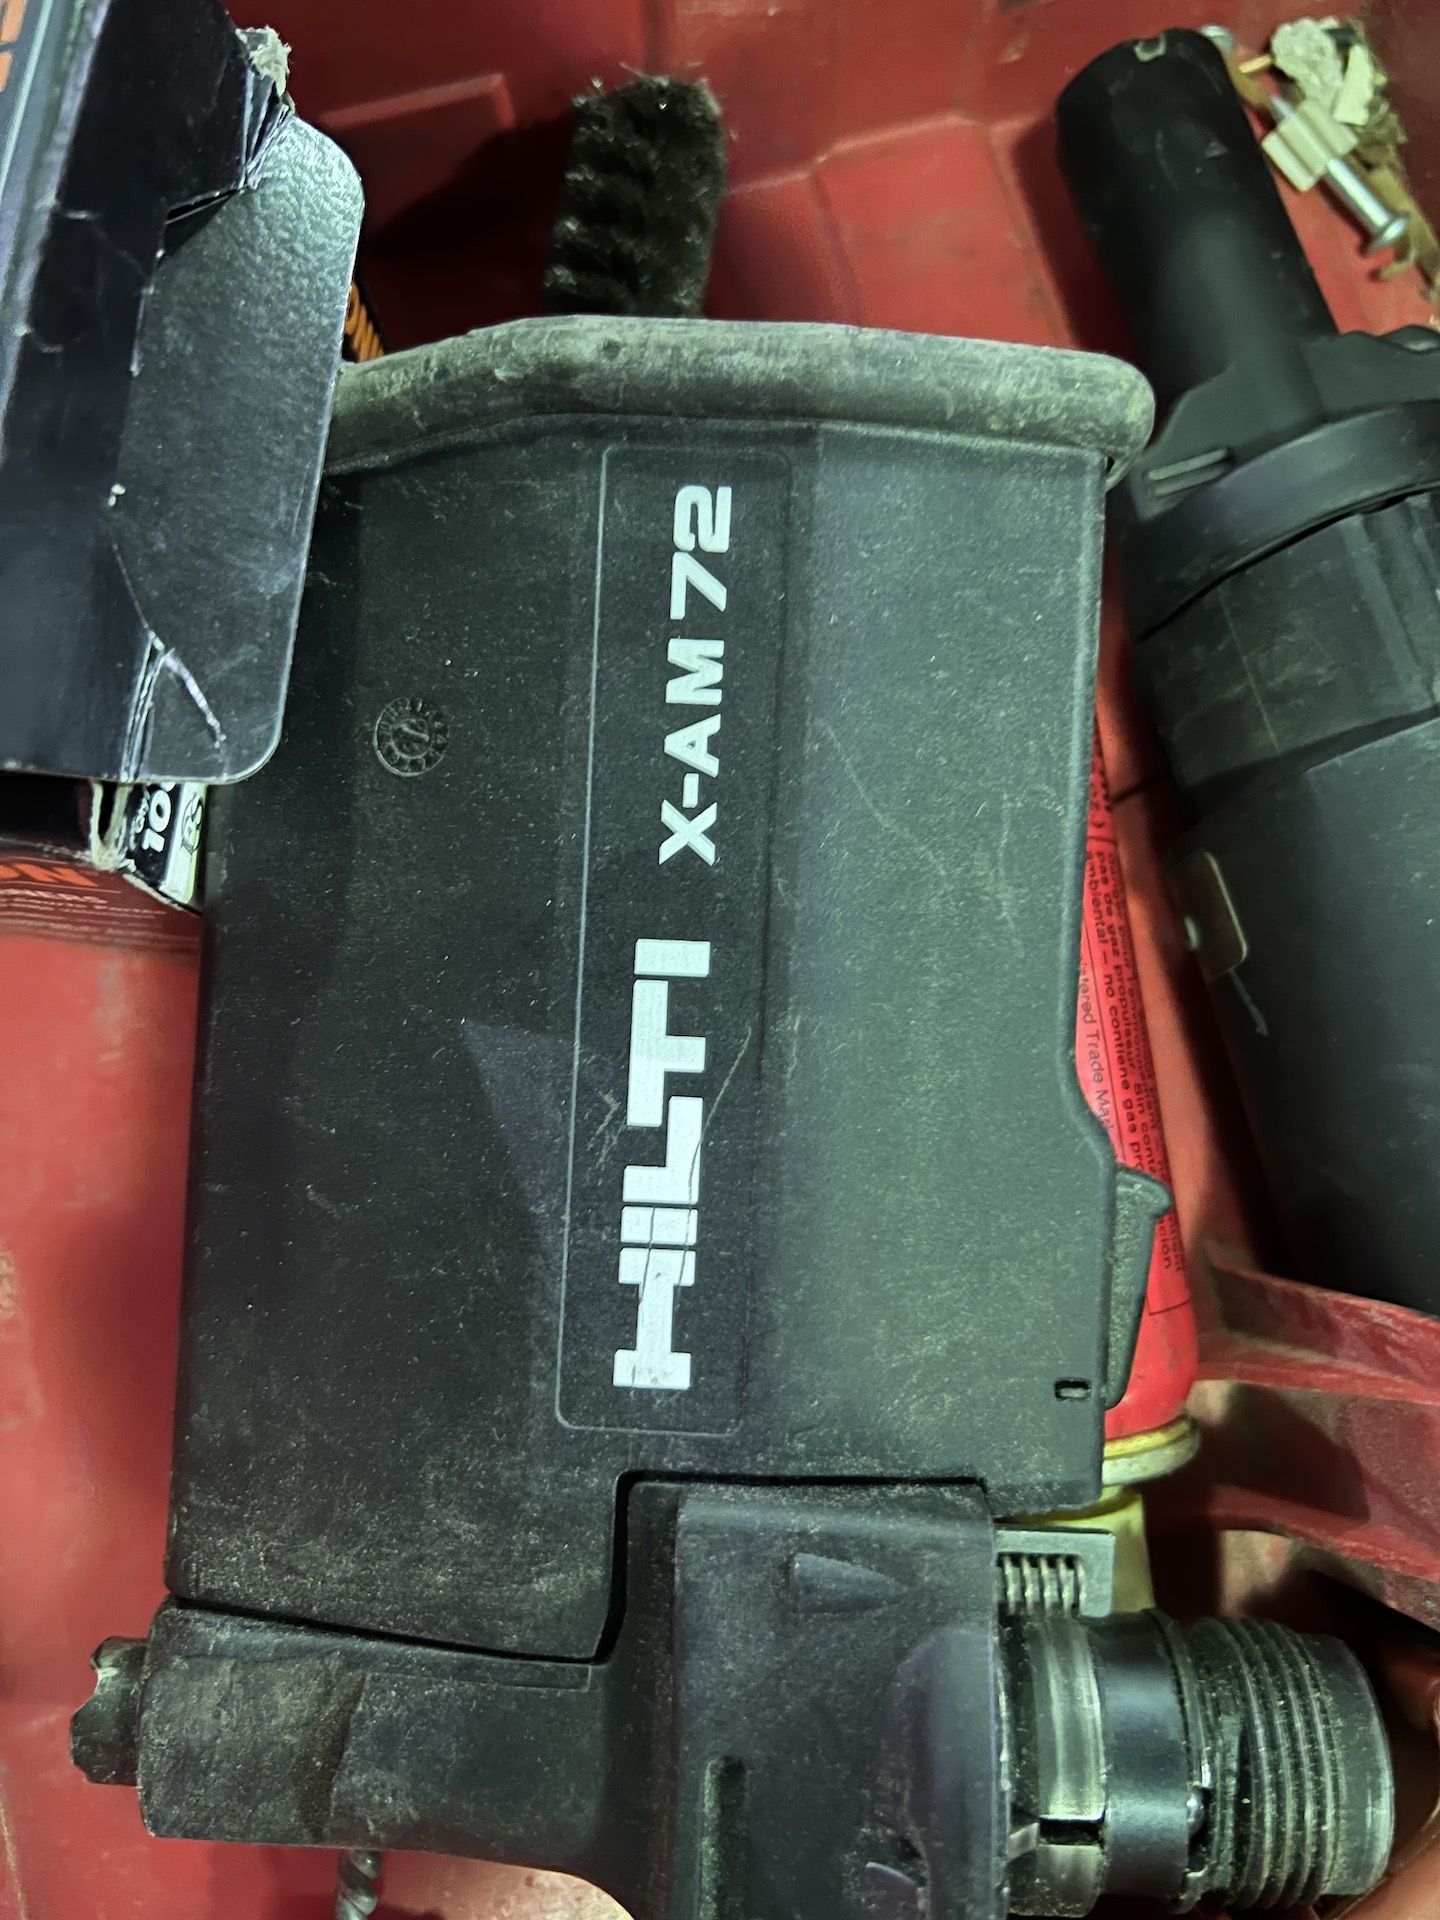 HILTI DX A41 POWDER ACTUATED NAIL GUN WITH X-1M72 MAGAZINE - Image 5 of 13